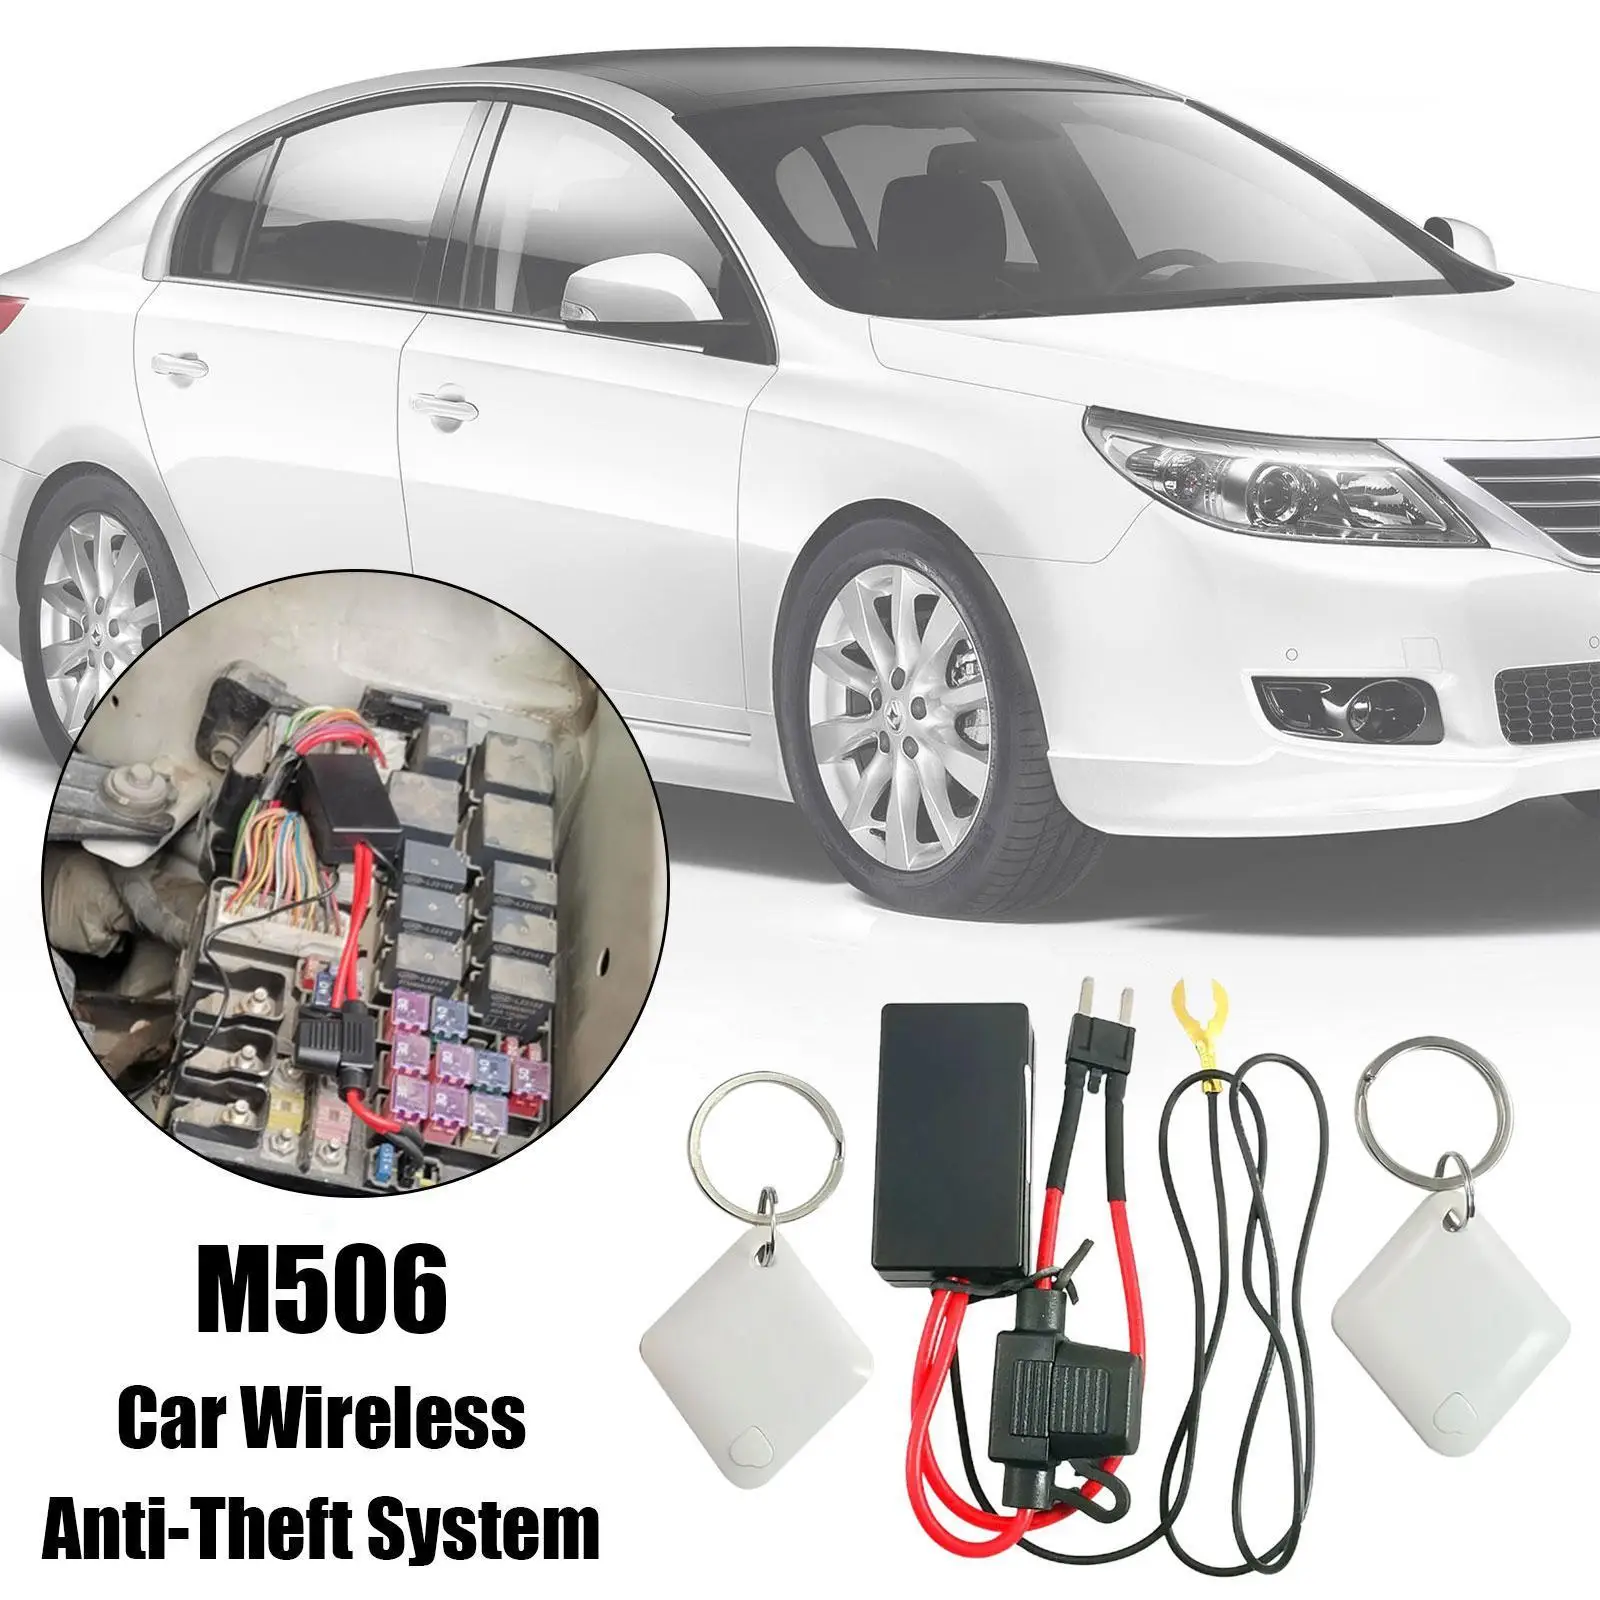 

Car Immobilizer System Auto-Sensing Wireless Immobilizer Circuit Off Anti-theft Intelligent Car Alarm Cut Engine Too Device V7N1